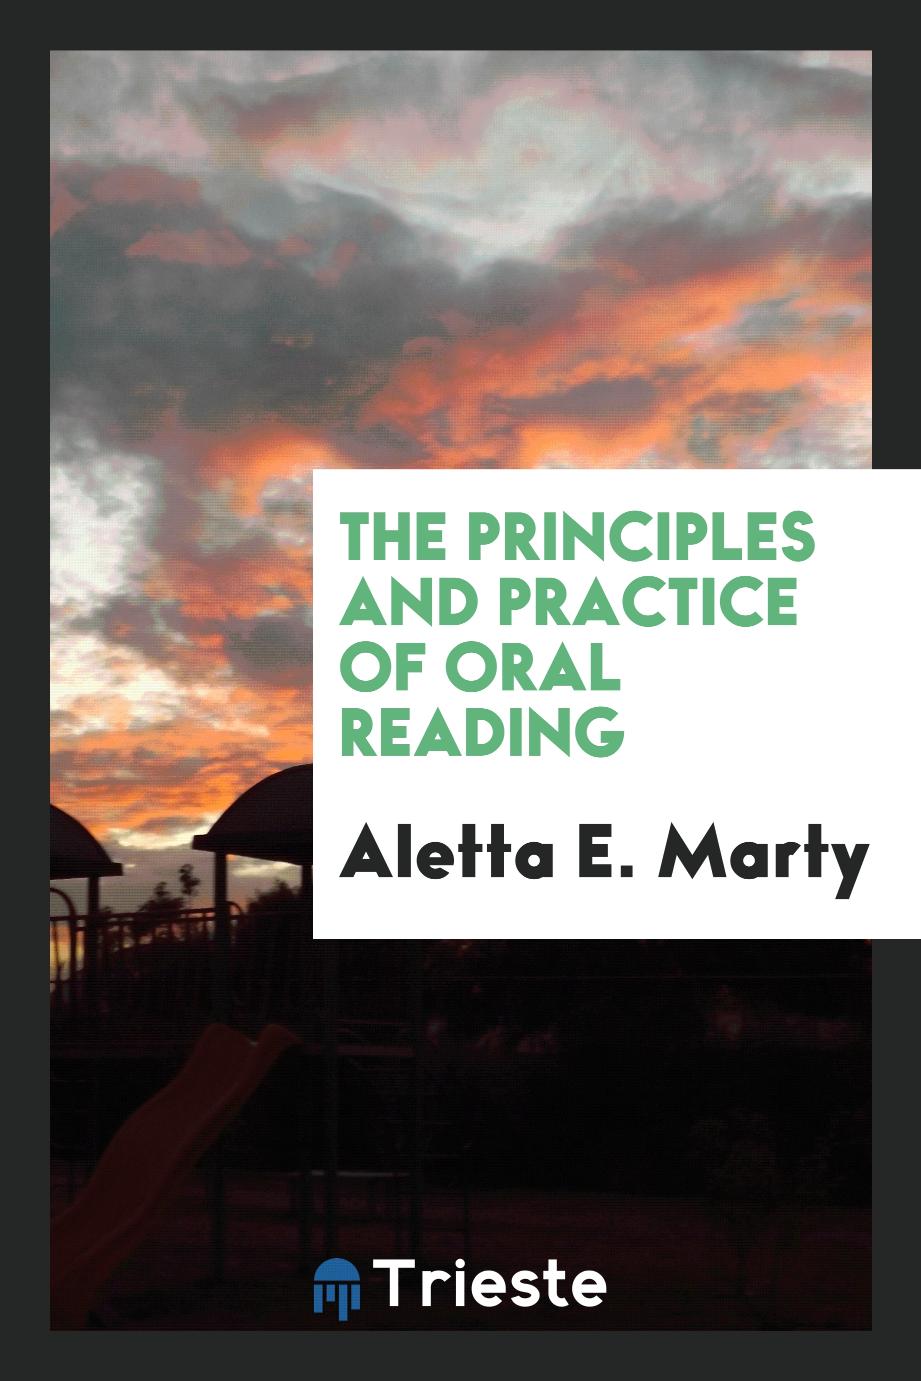 The principles and practice of oral reading